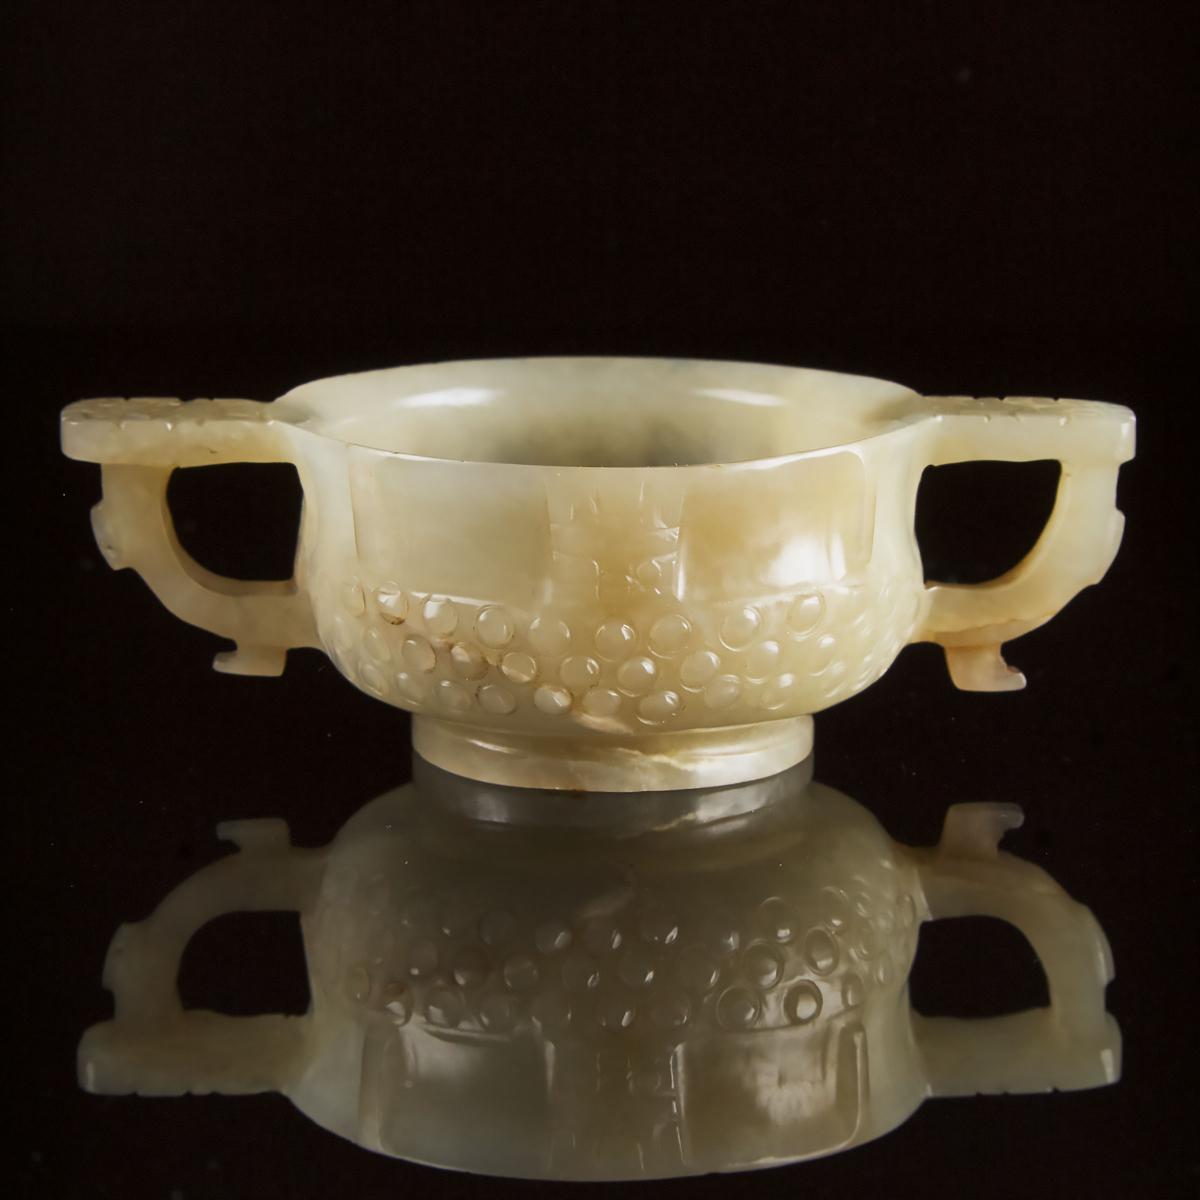 A Chinese Archaistic Celadon White Jade Libation Cup, Ming Dynasty, 17th Century, 明 青白玉雕乳钉兽面纹杯, 1.4